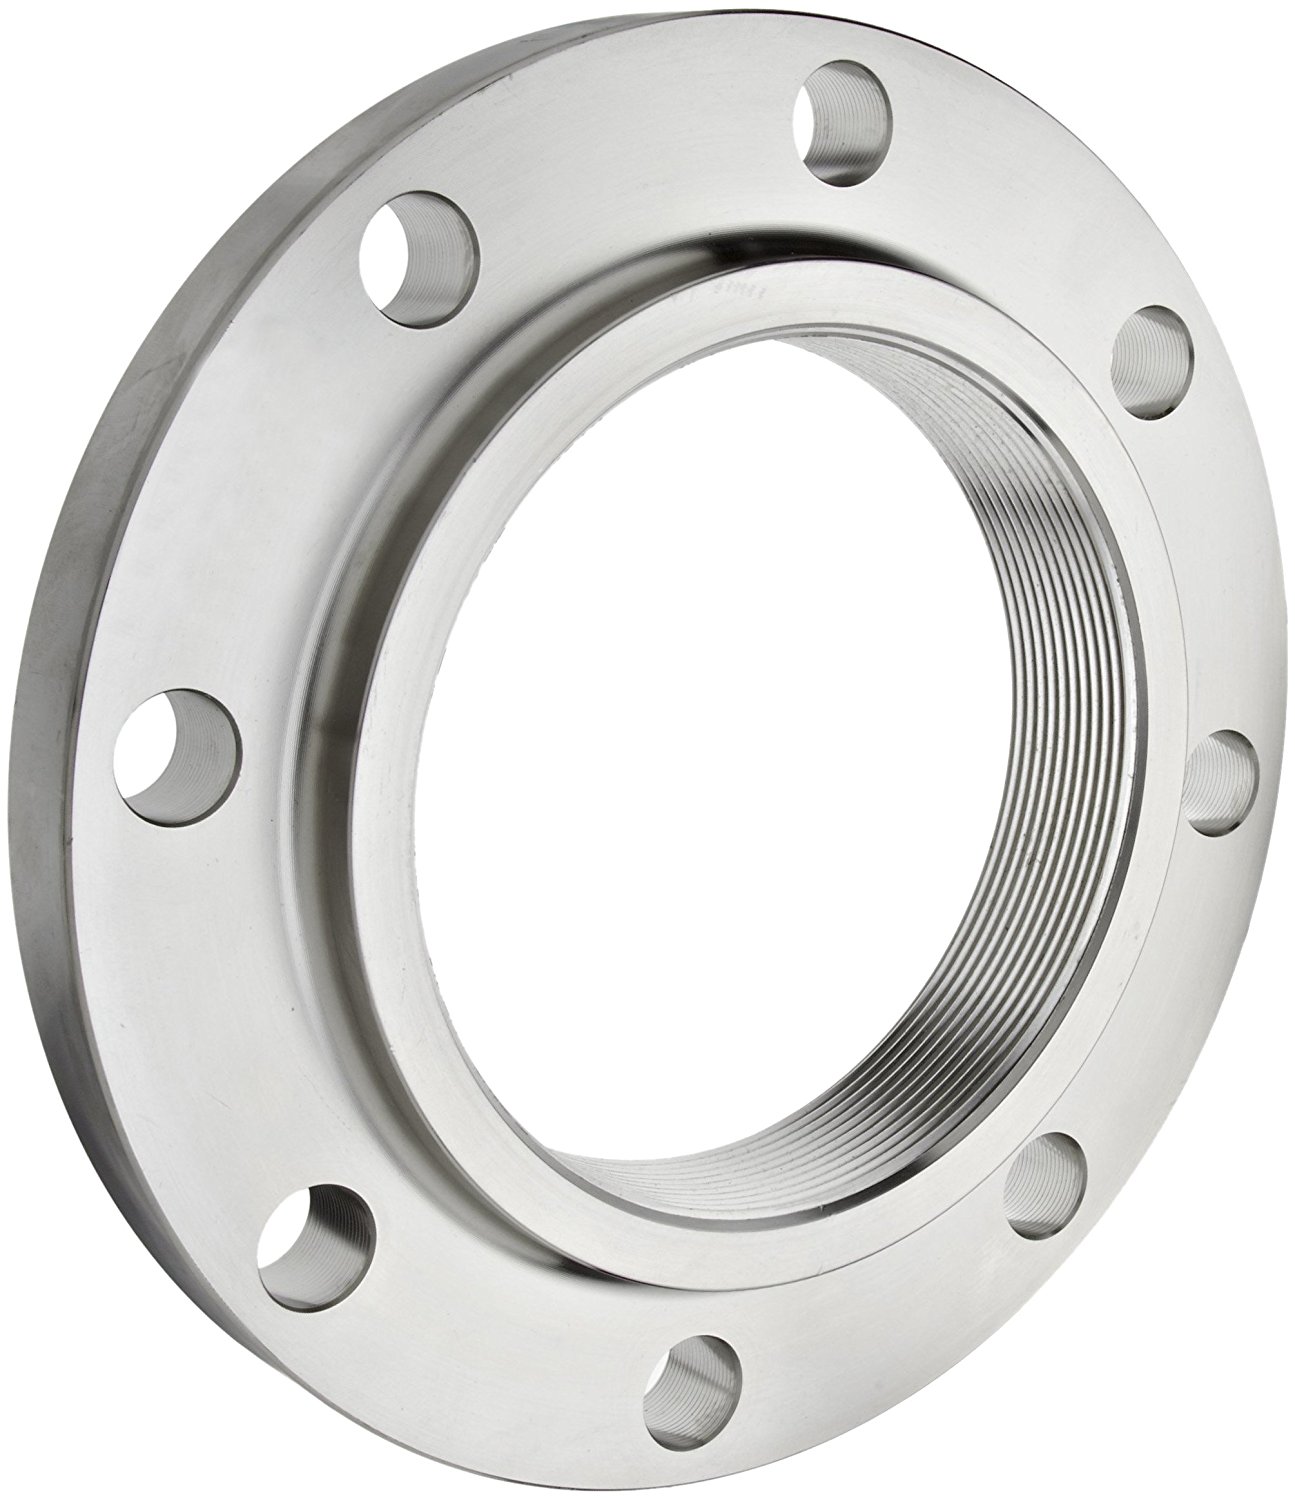 class1500-threaded-flanges-manufacturers-exporters-suppliers-importers